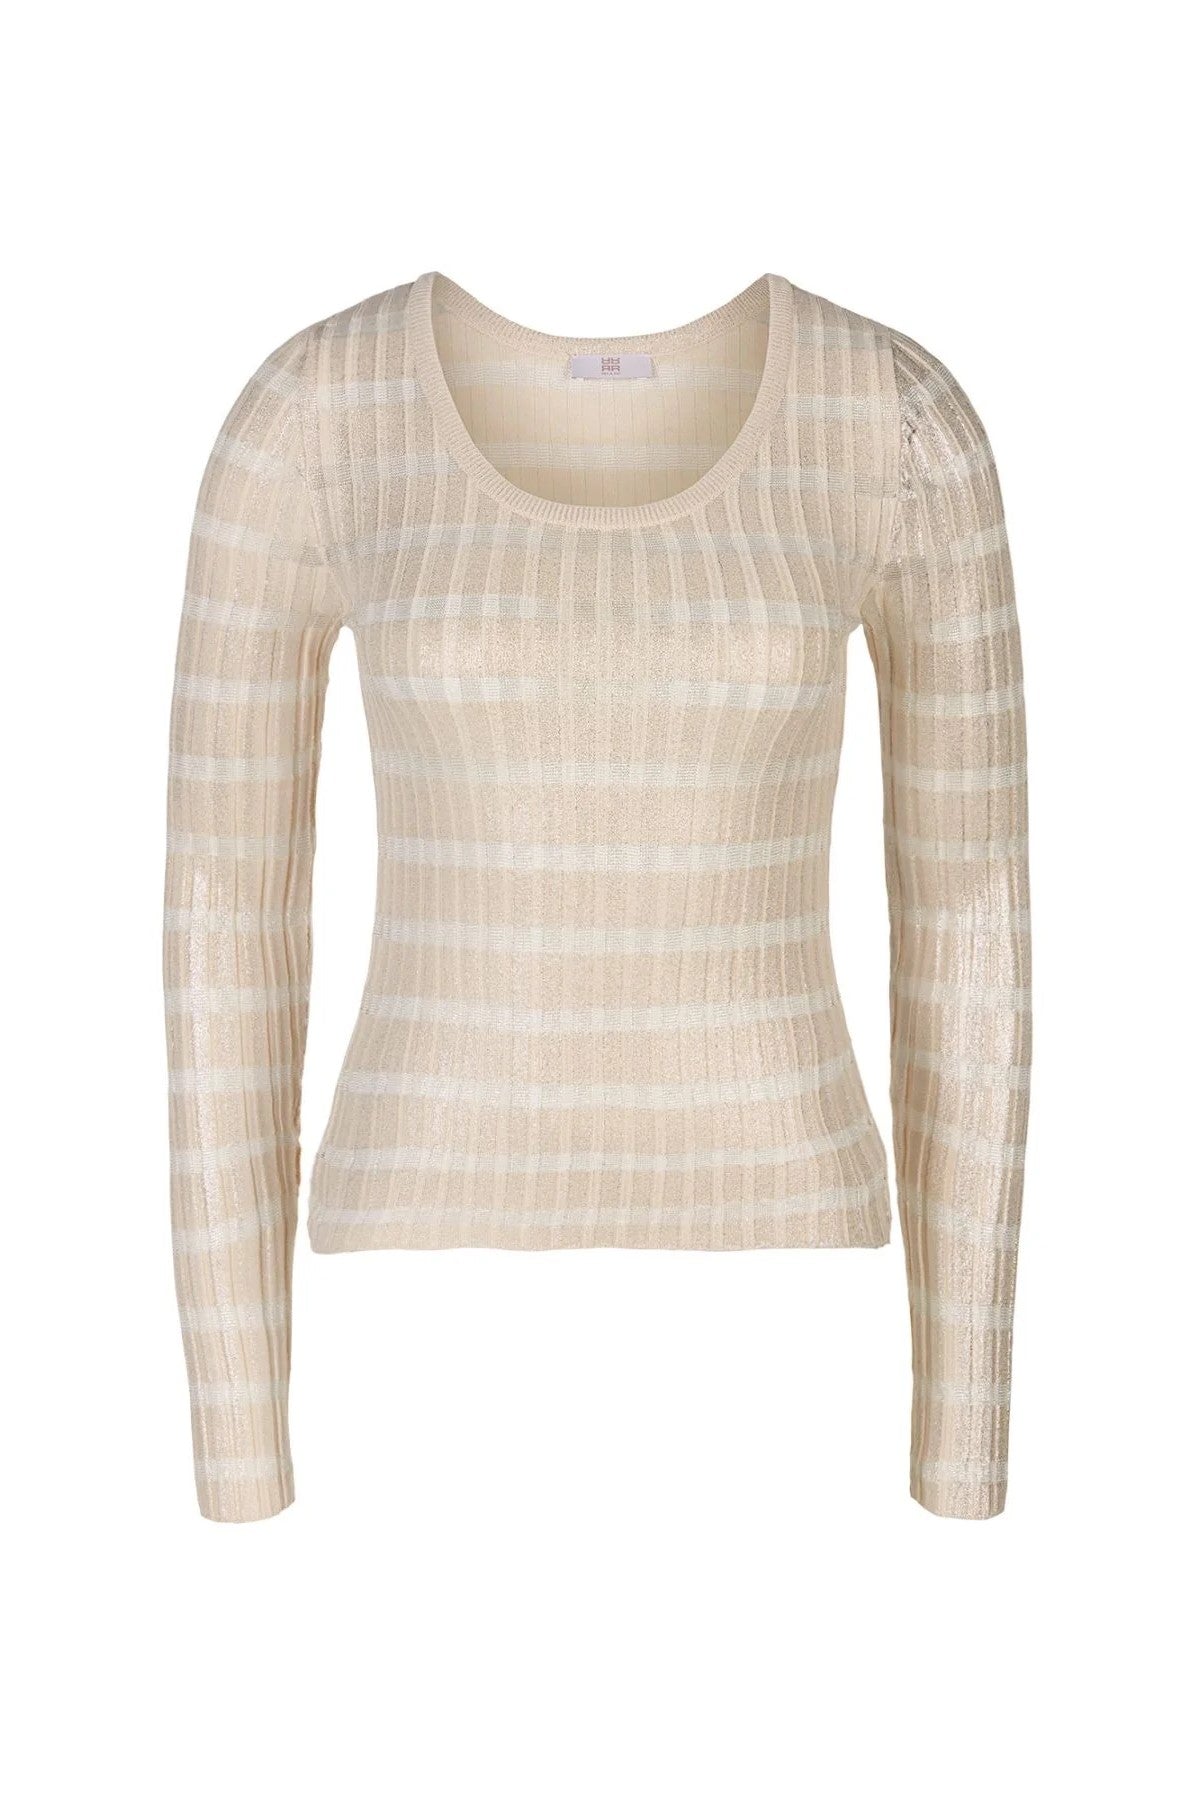 Riani Transparent Knit Pullover